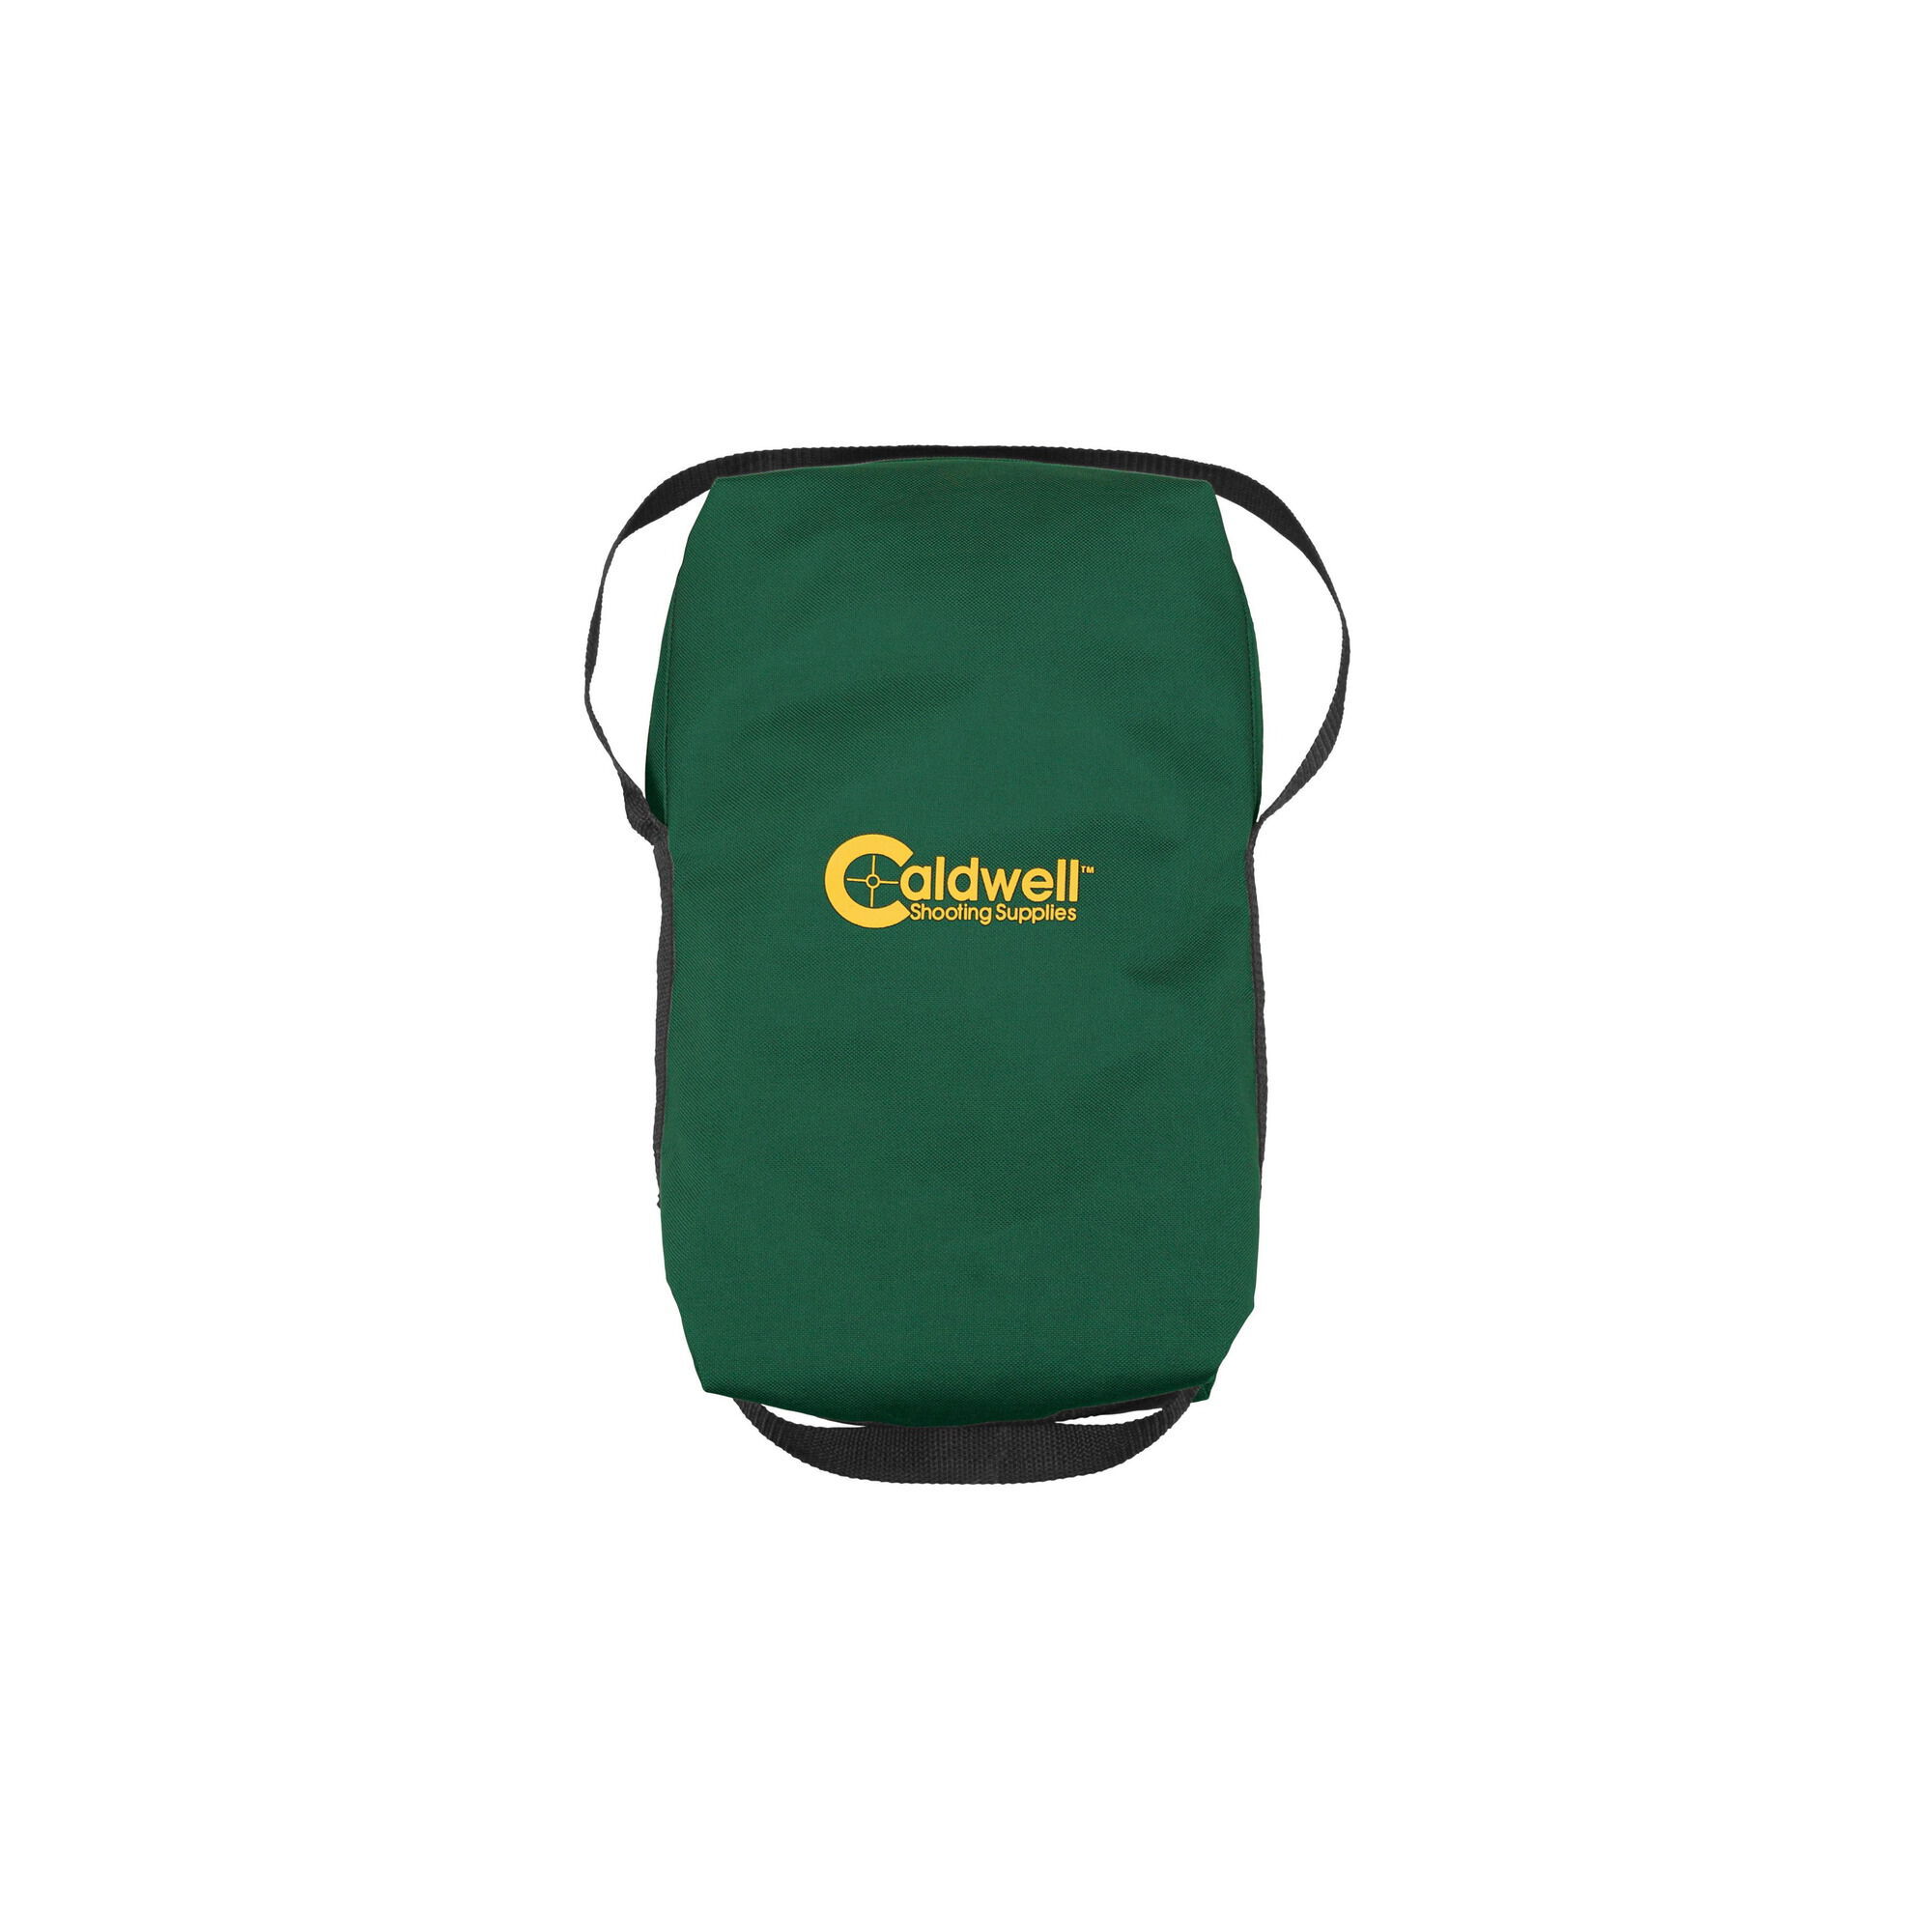 Caldwell Lead Sled Weight Bag for sale online